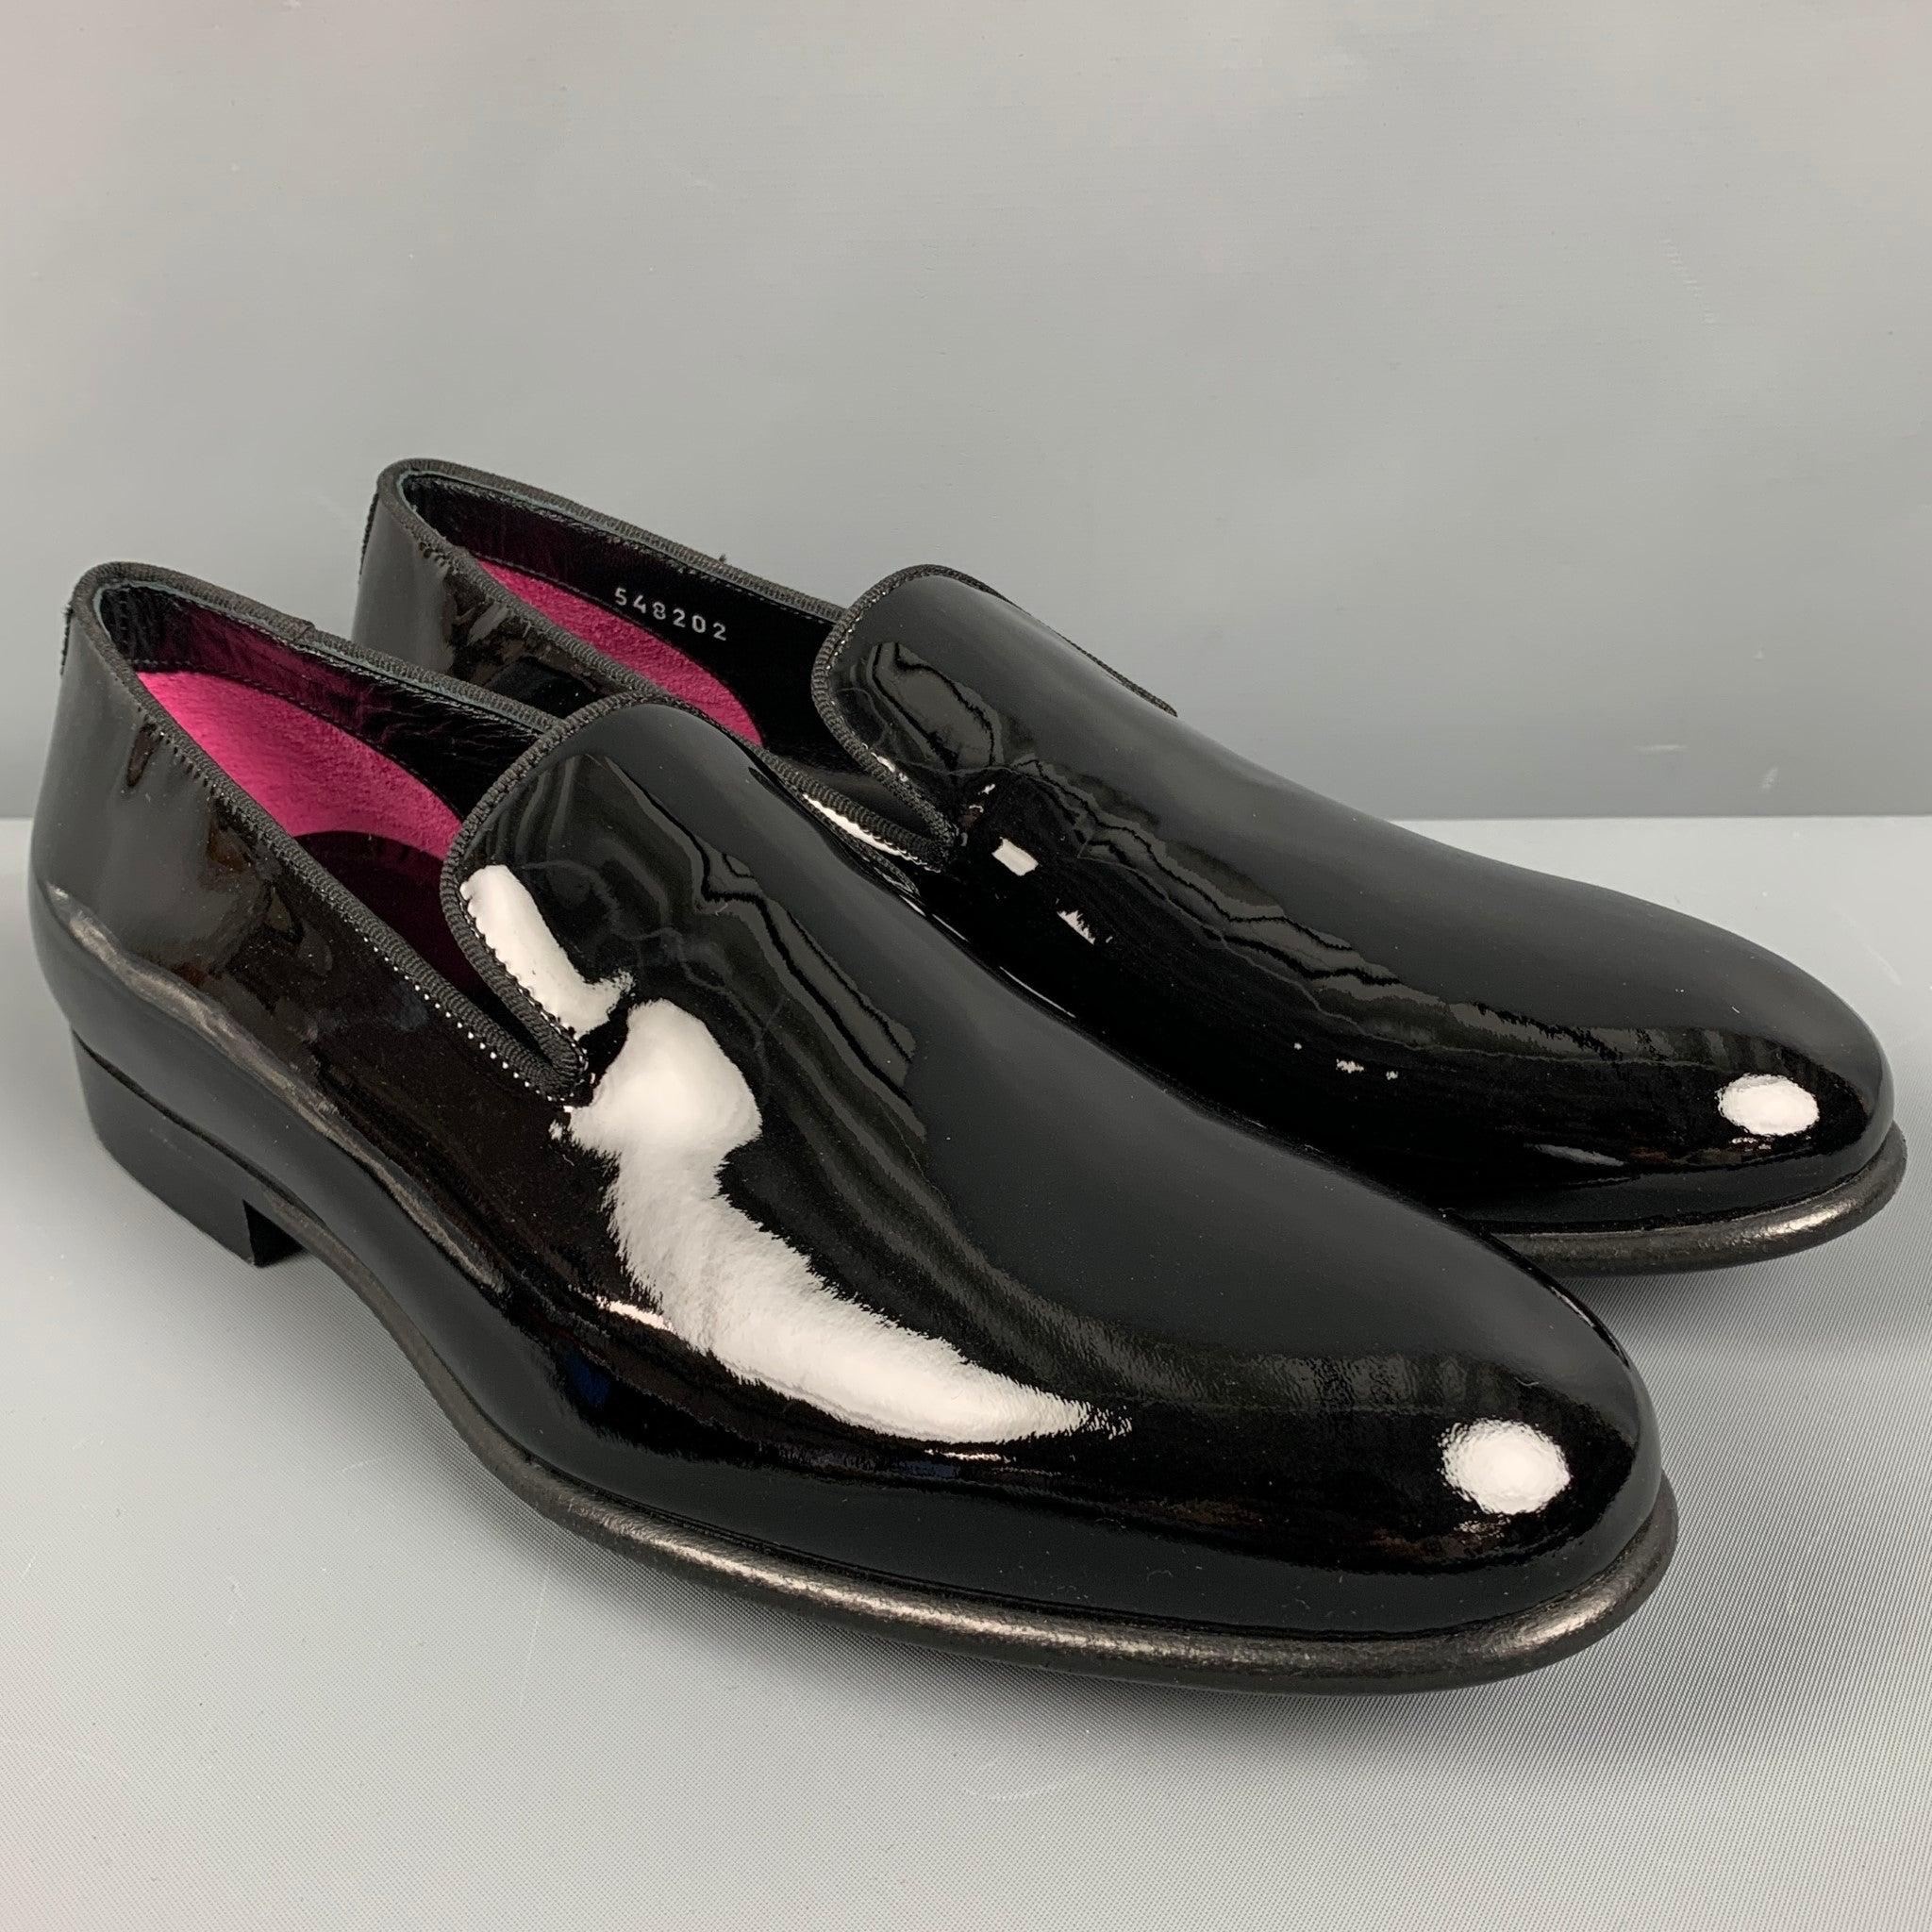 PAUL SMITH loafers
in a black patent leather featuring a slip on style. Comes with box. Made in Italy.New with Box. 

Marked:   548202Outsole:11 inches  x 3.75 inches 
  
  
 
Reference: 127681
Category: Loafers
More Details
    
Brand:  PAUL